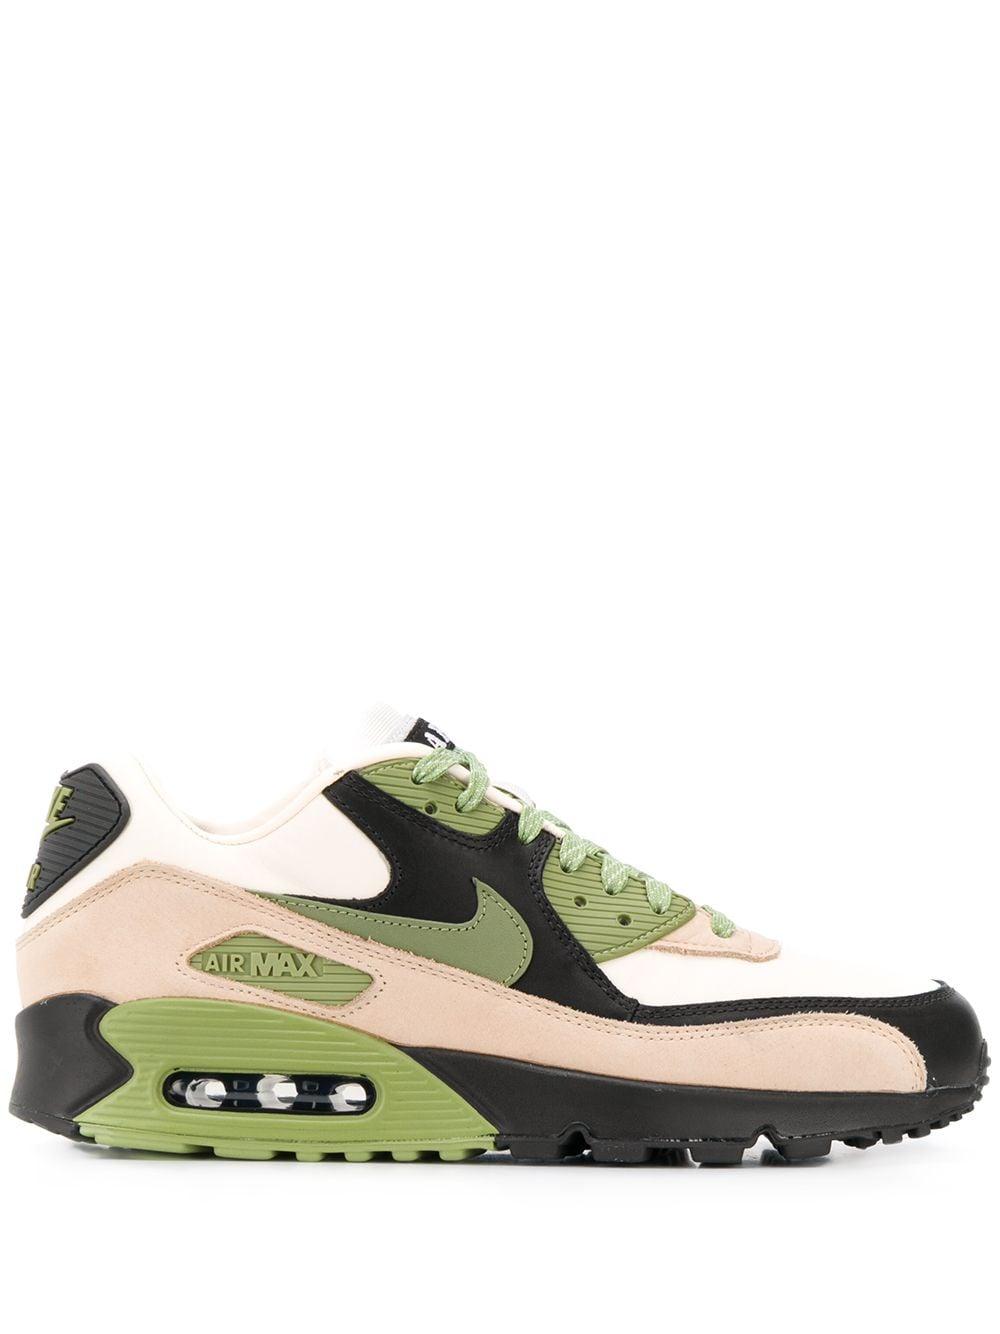 Nike Suede Air Max 90 Nrg Casual Running Shoes in Light Cream ...